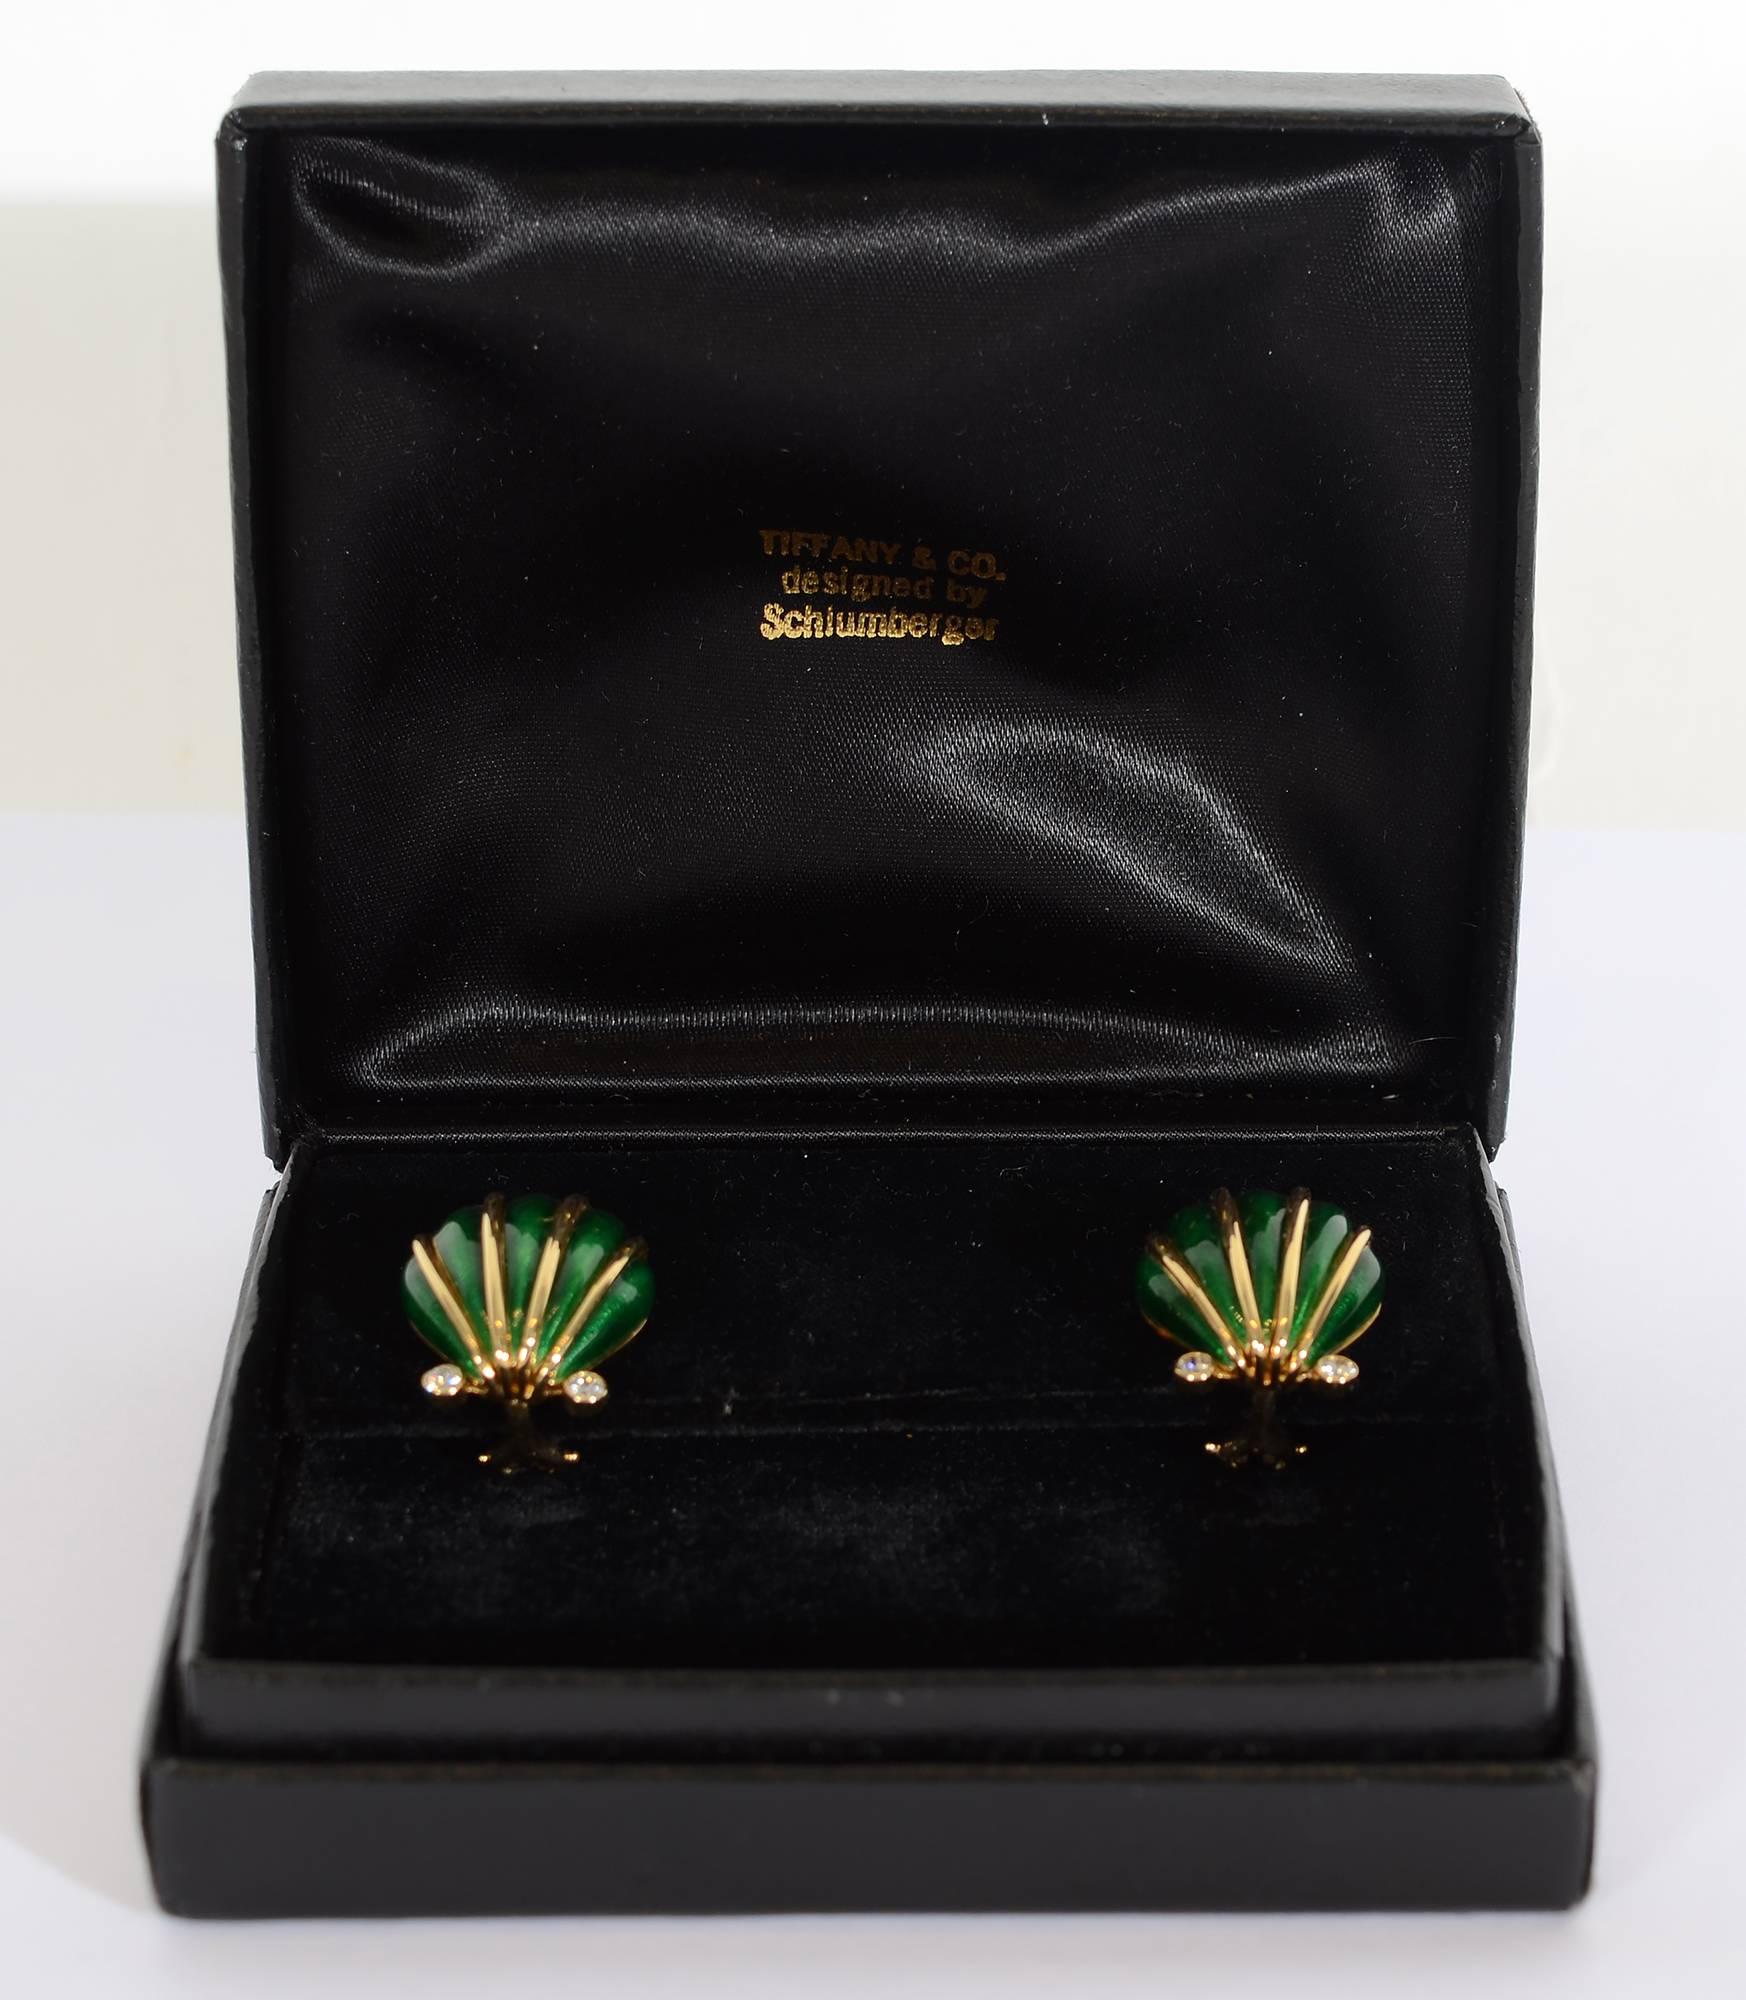 The addition of diamonds makes these Schlumberger enamel shell shaped earrings dressier than usual. Measurements are 13/16